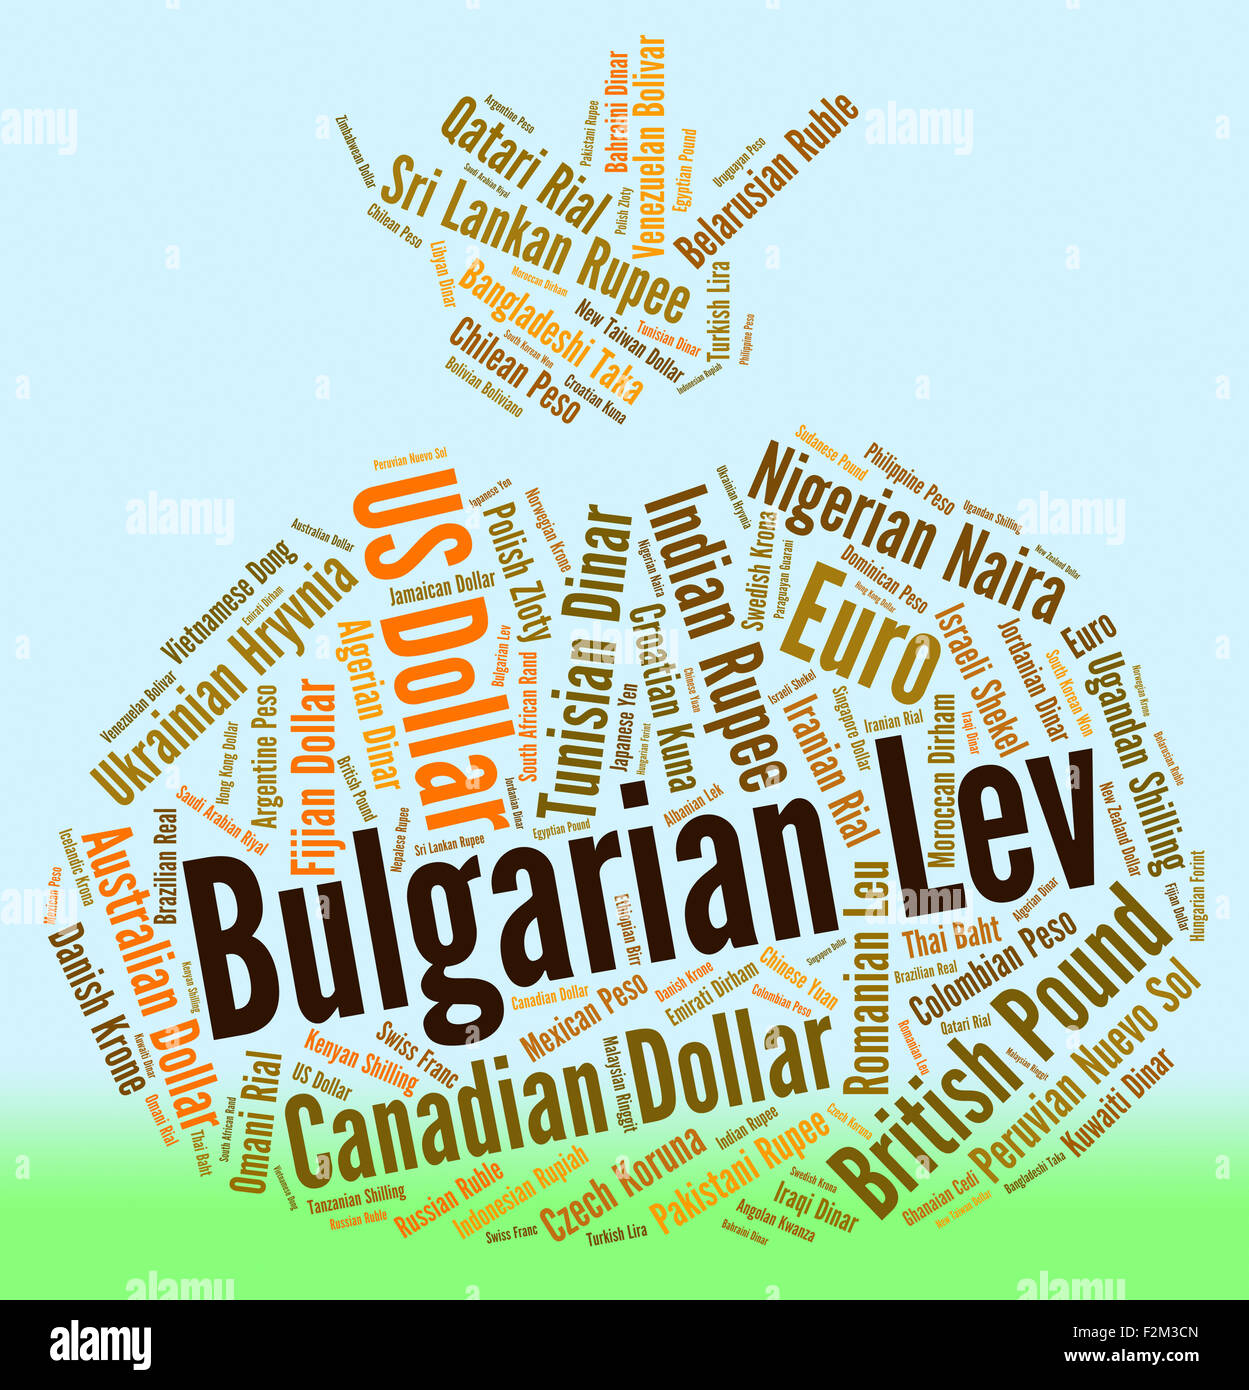 Bulgarian Lev Showing Forex Trading And Levs Stock Photo